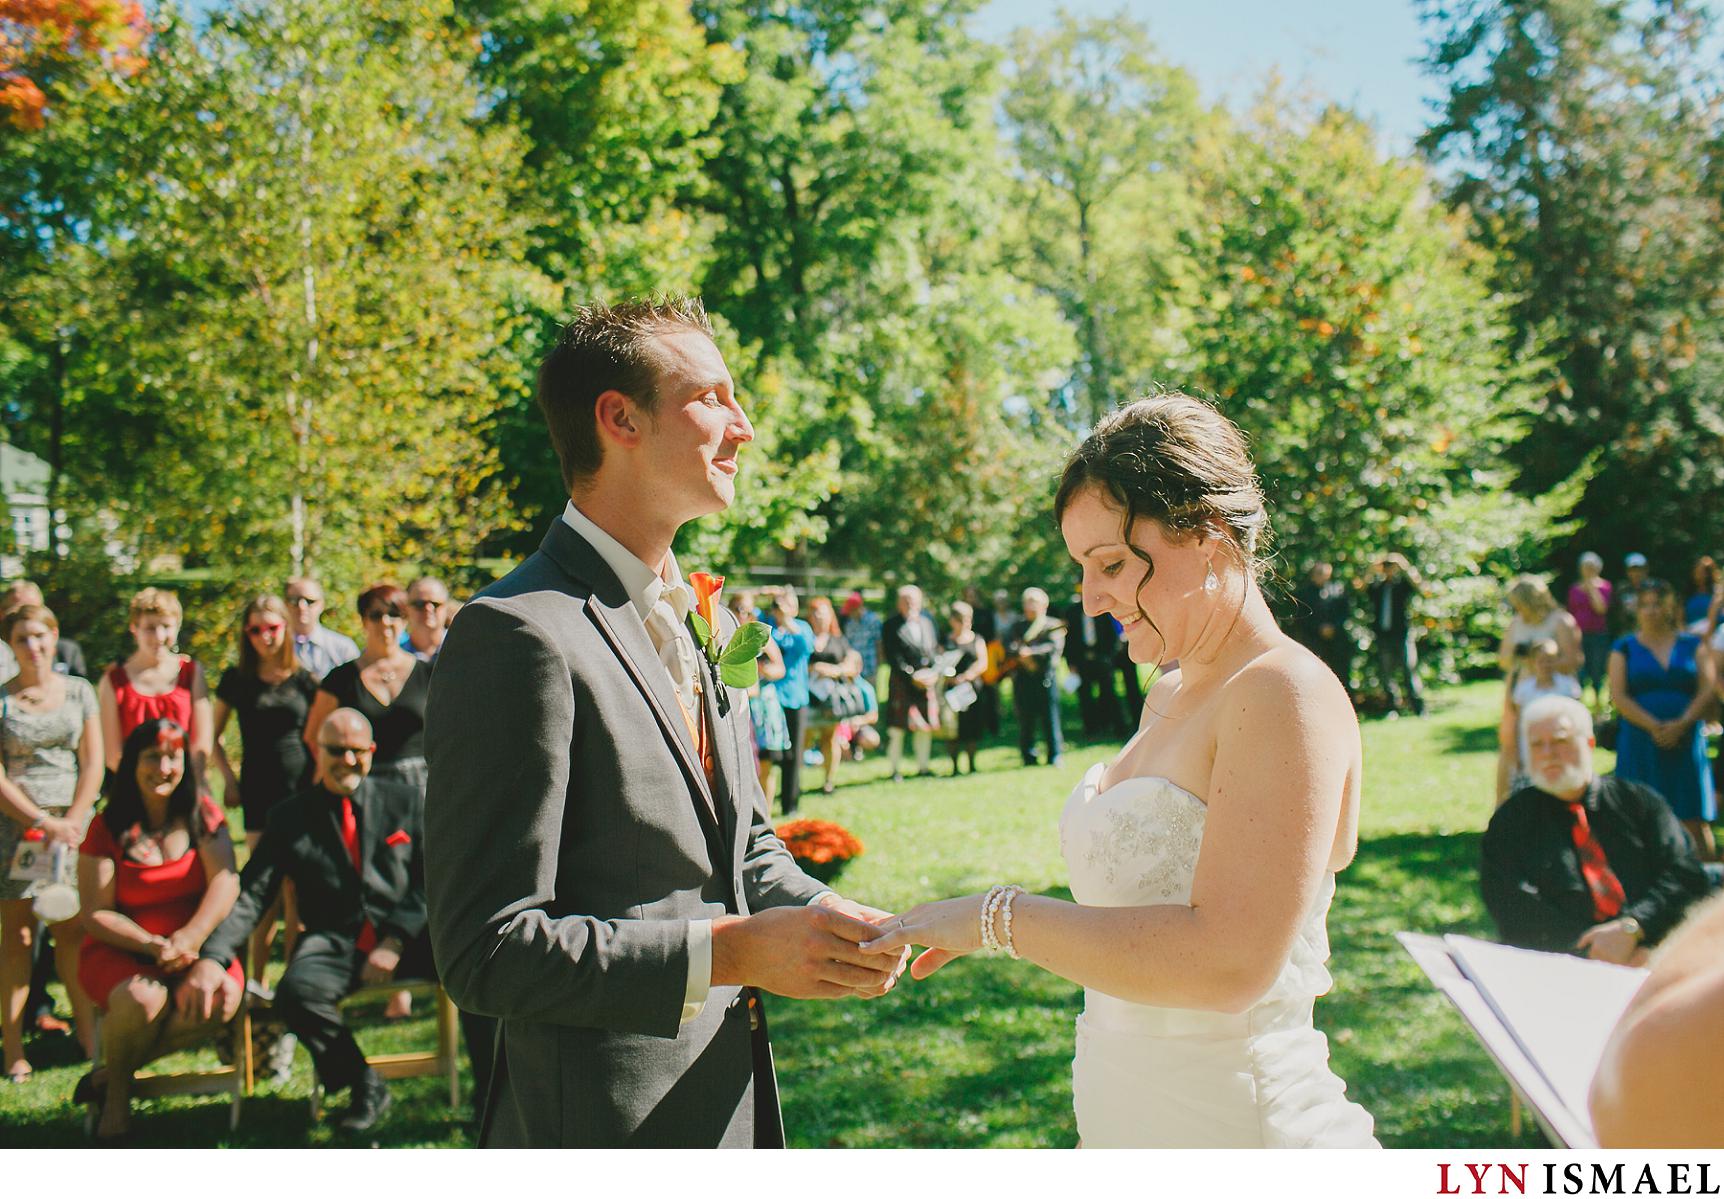 The exchange of rings photographed at an outdoor wedding by Elora wedding photographer